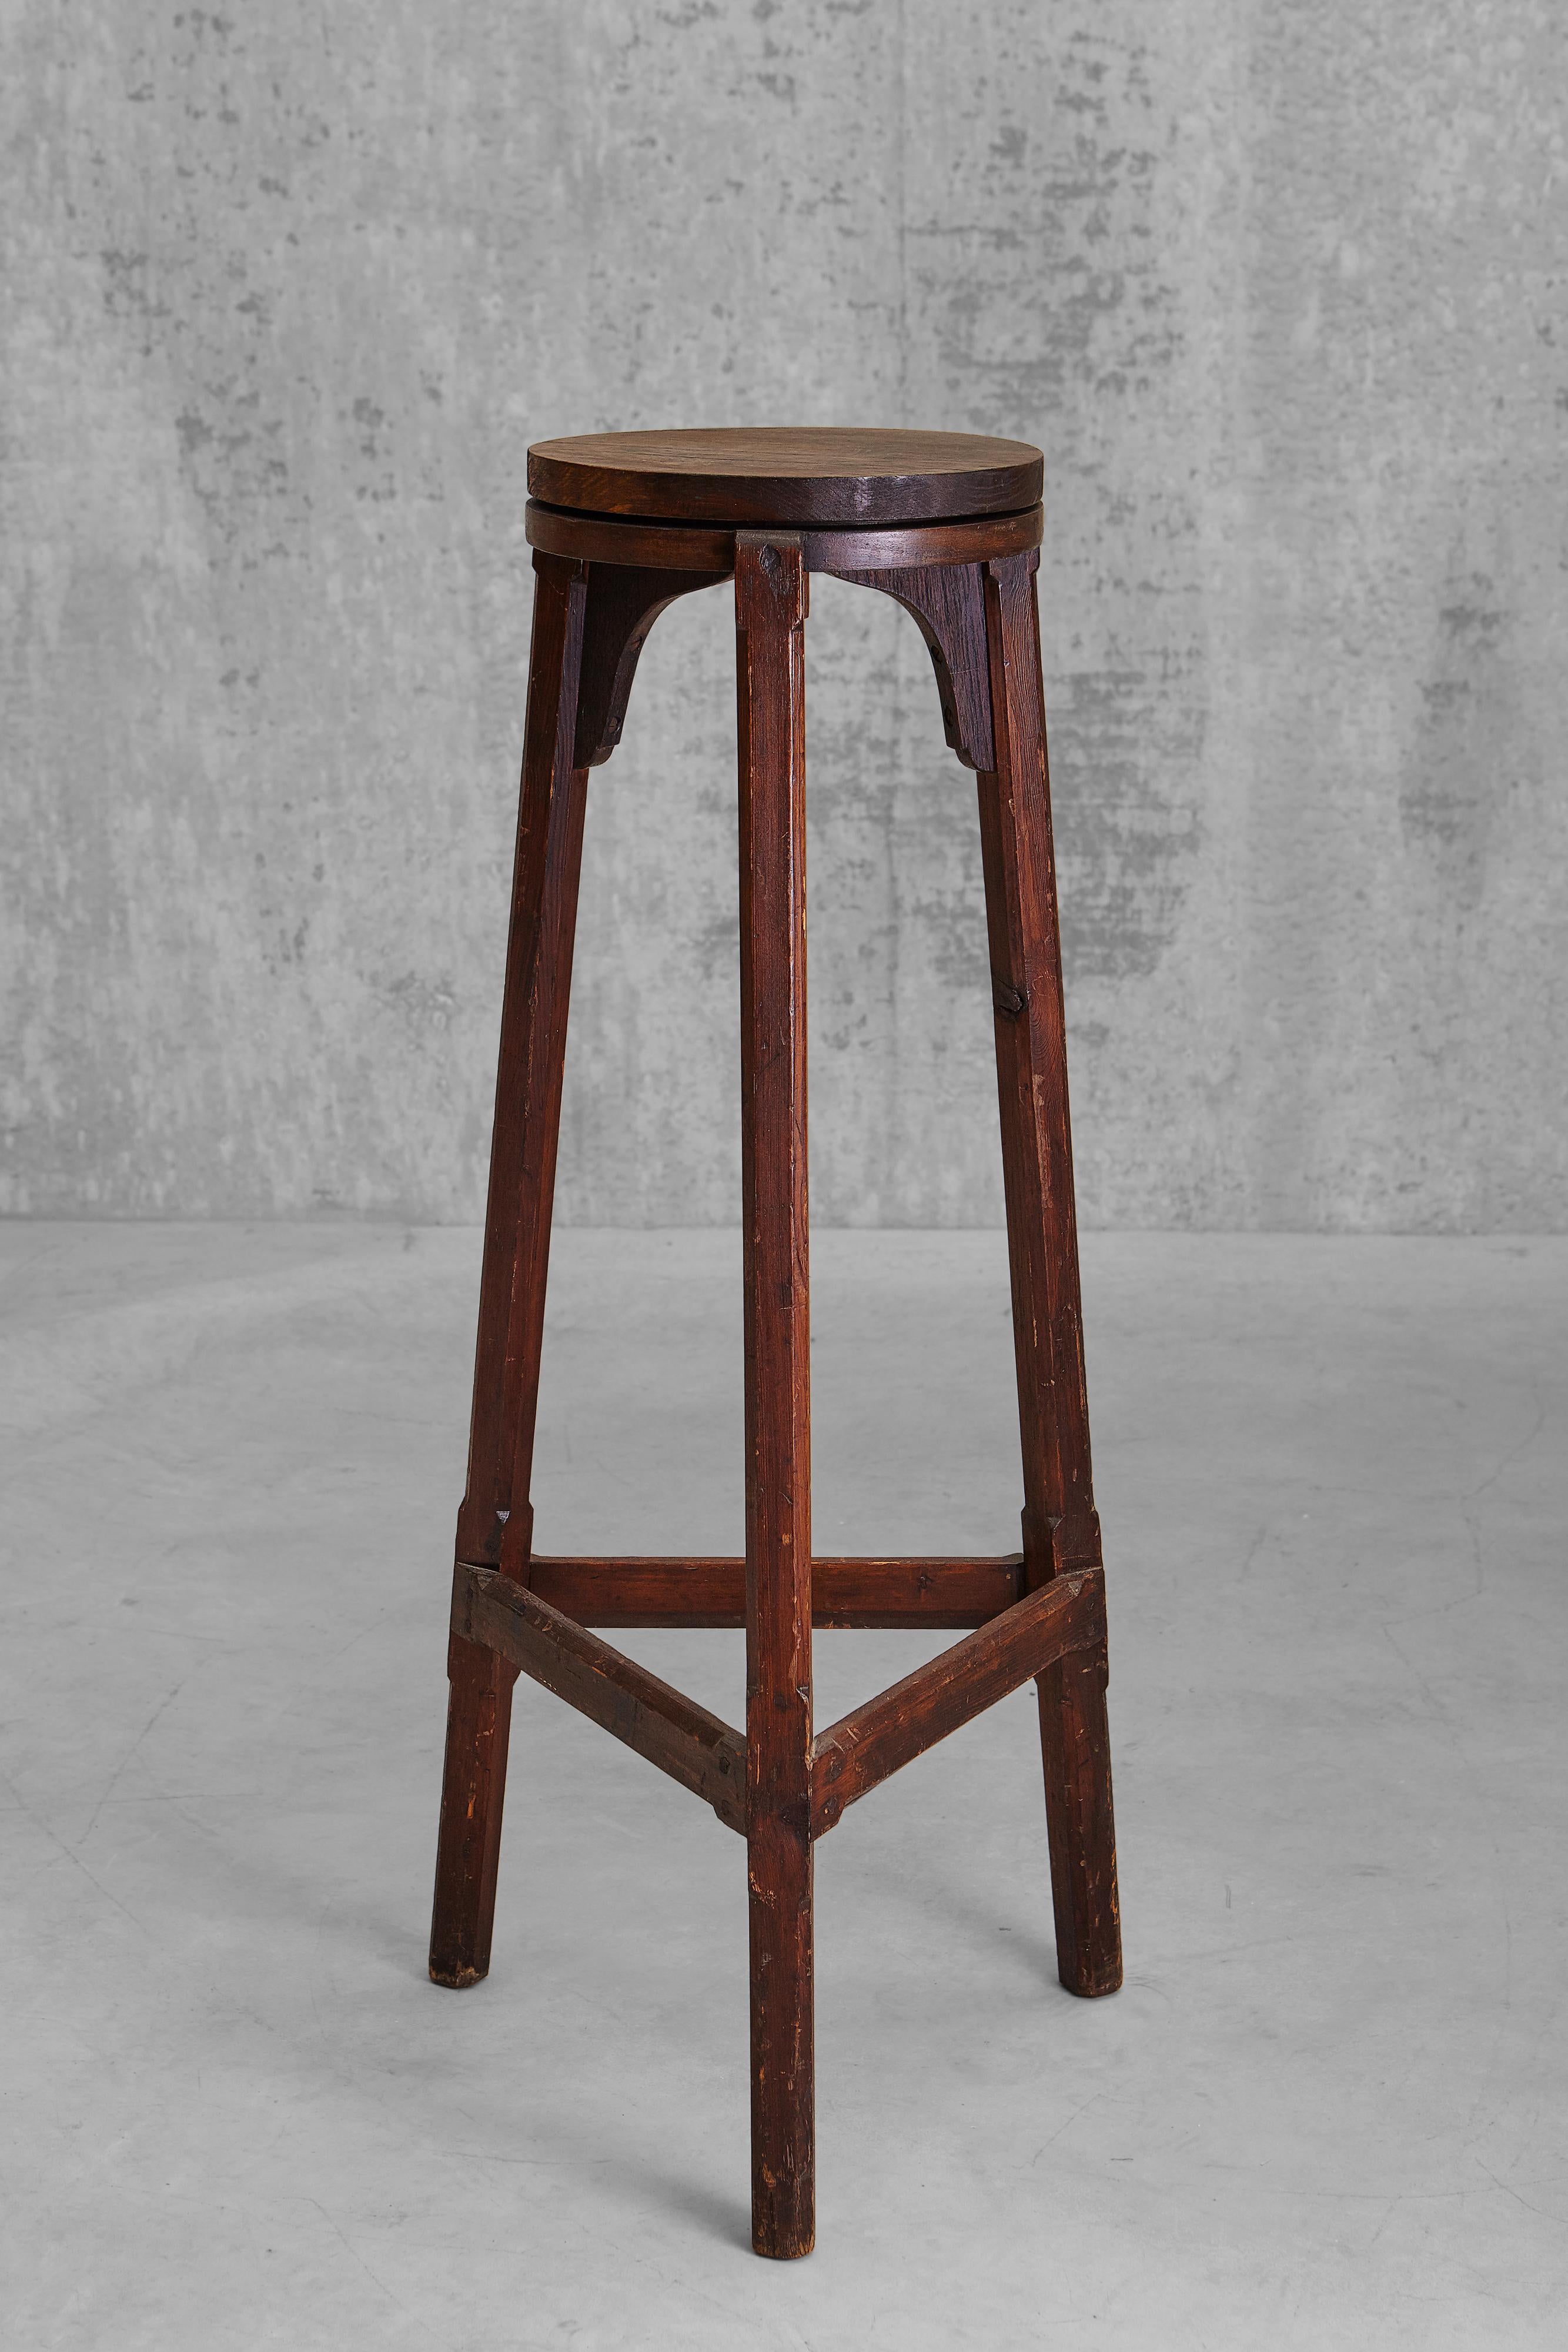 This nineteenth-century handmade grain wooden sculptor's table, in all probability from France, is ready to hold any work of art. It is a sculptors pedestal modeling stand with rotating circular platform within a triform structure of spayed legs, as